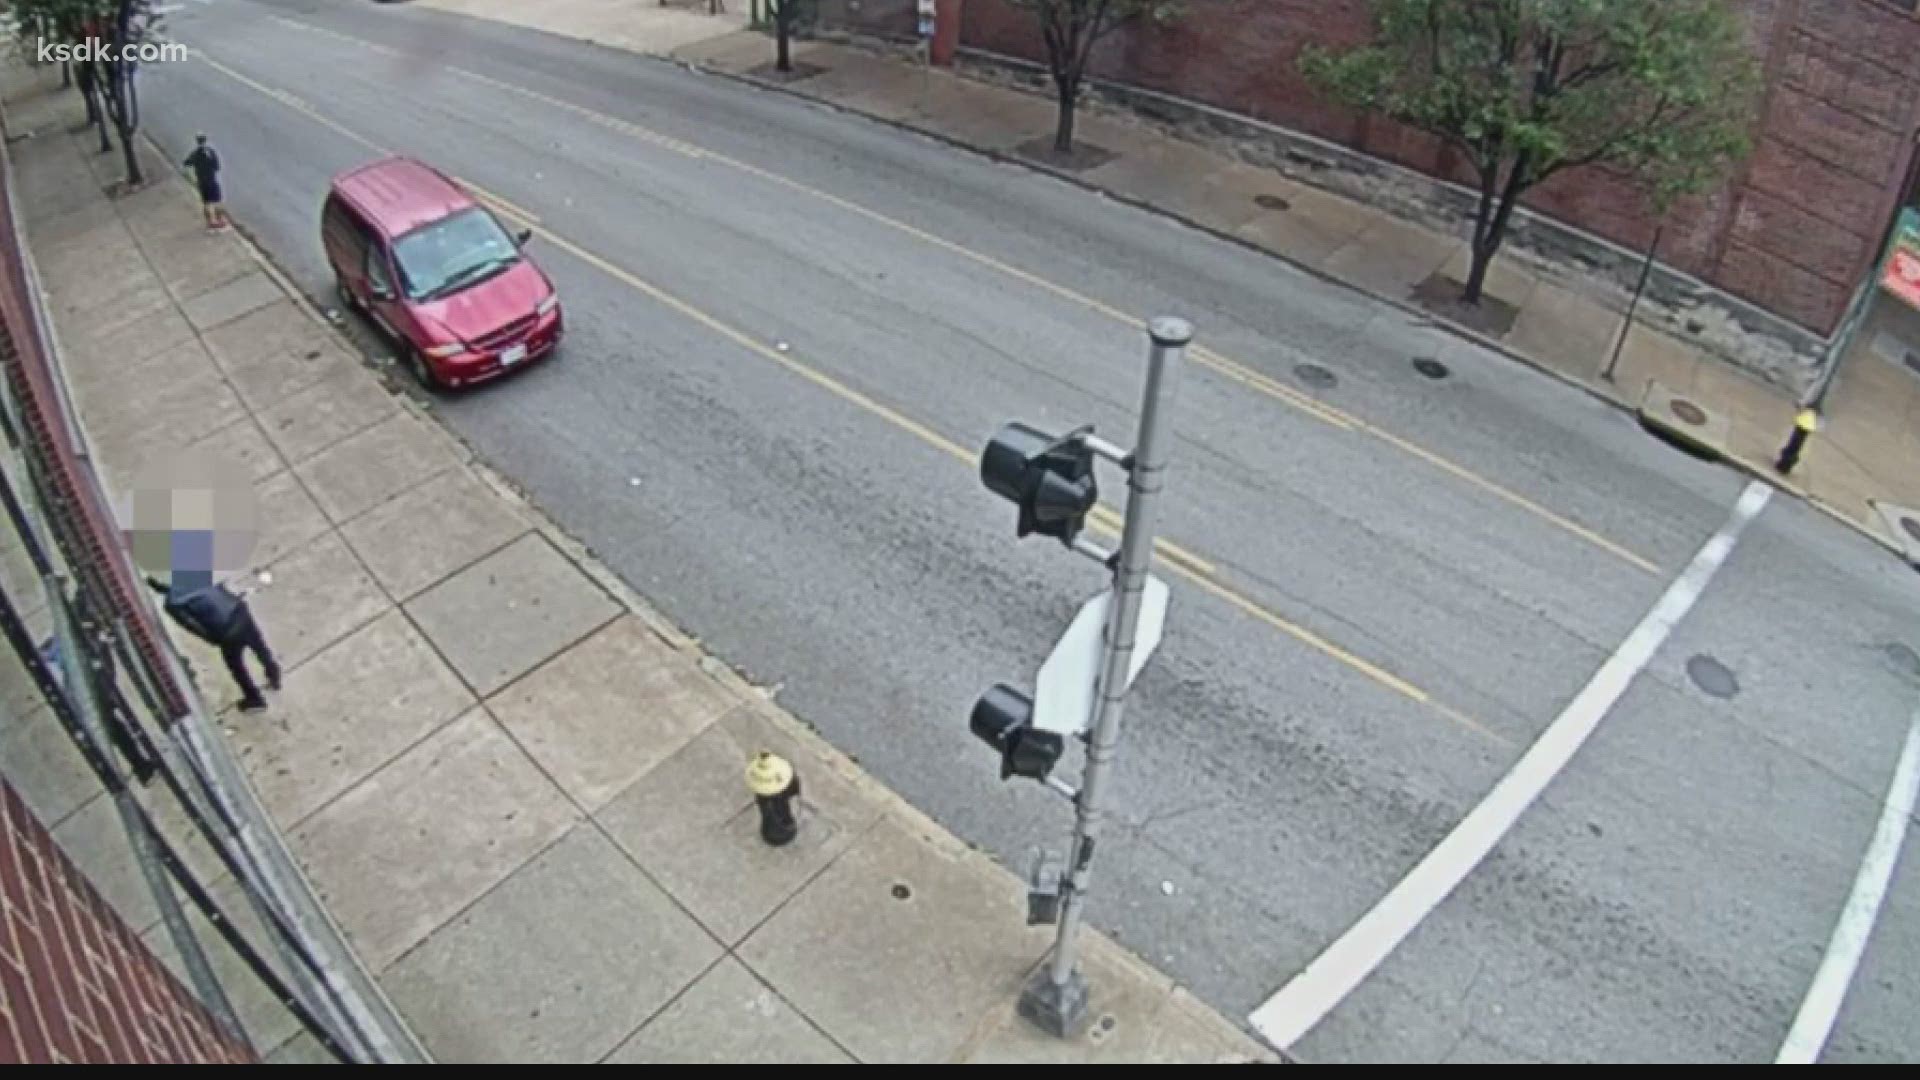 SLMPD released video of the person going up to the woman on the sidewalk and taking her cellphone